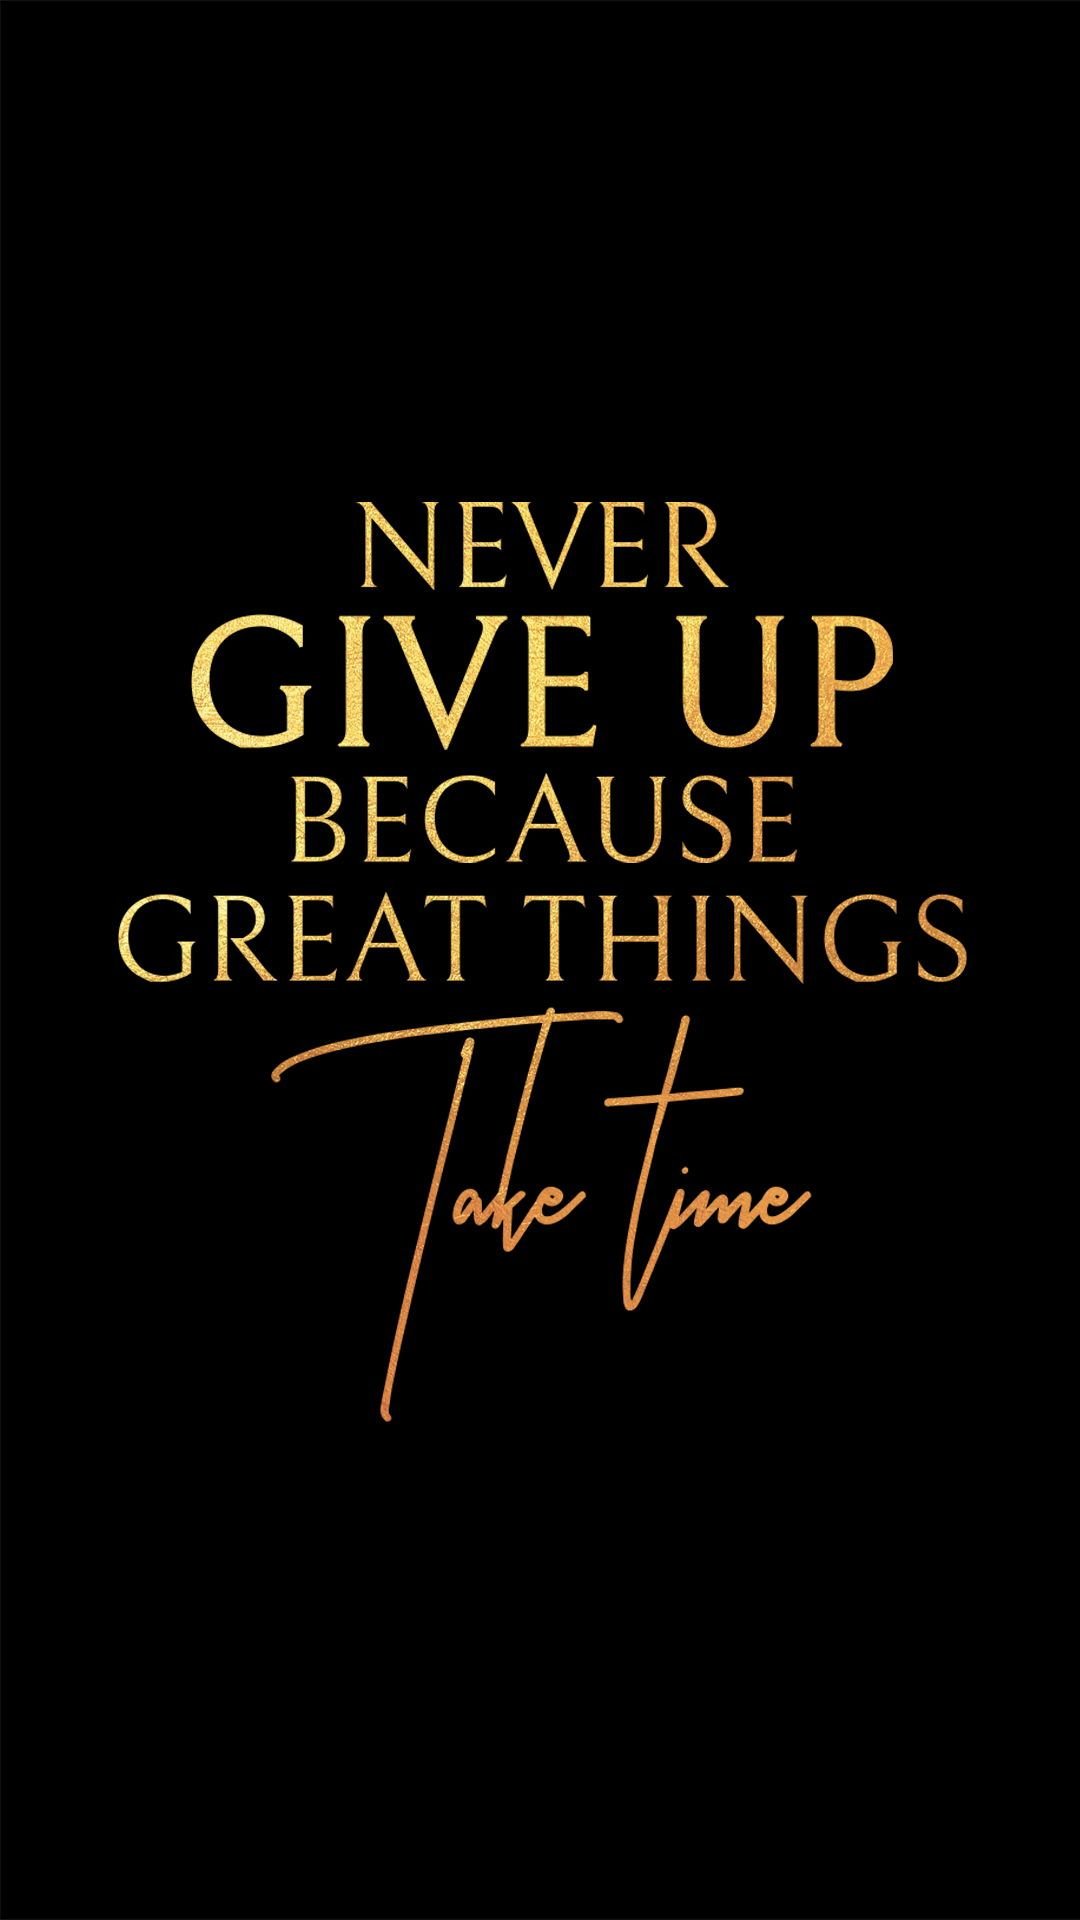 Never Give Up - Great Things Take Time | Motivational Wallpaper ...